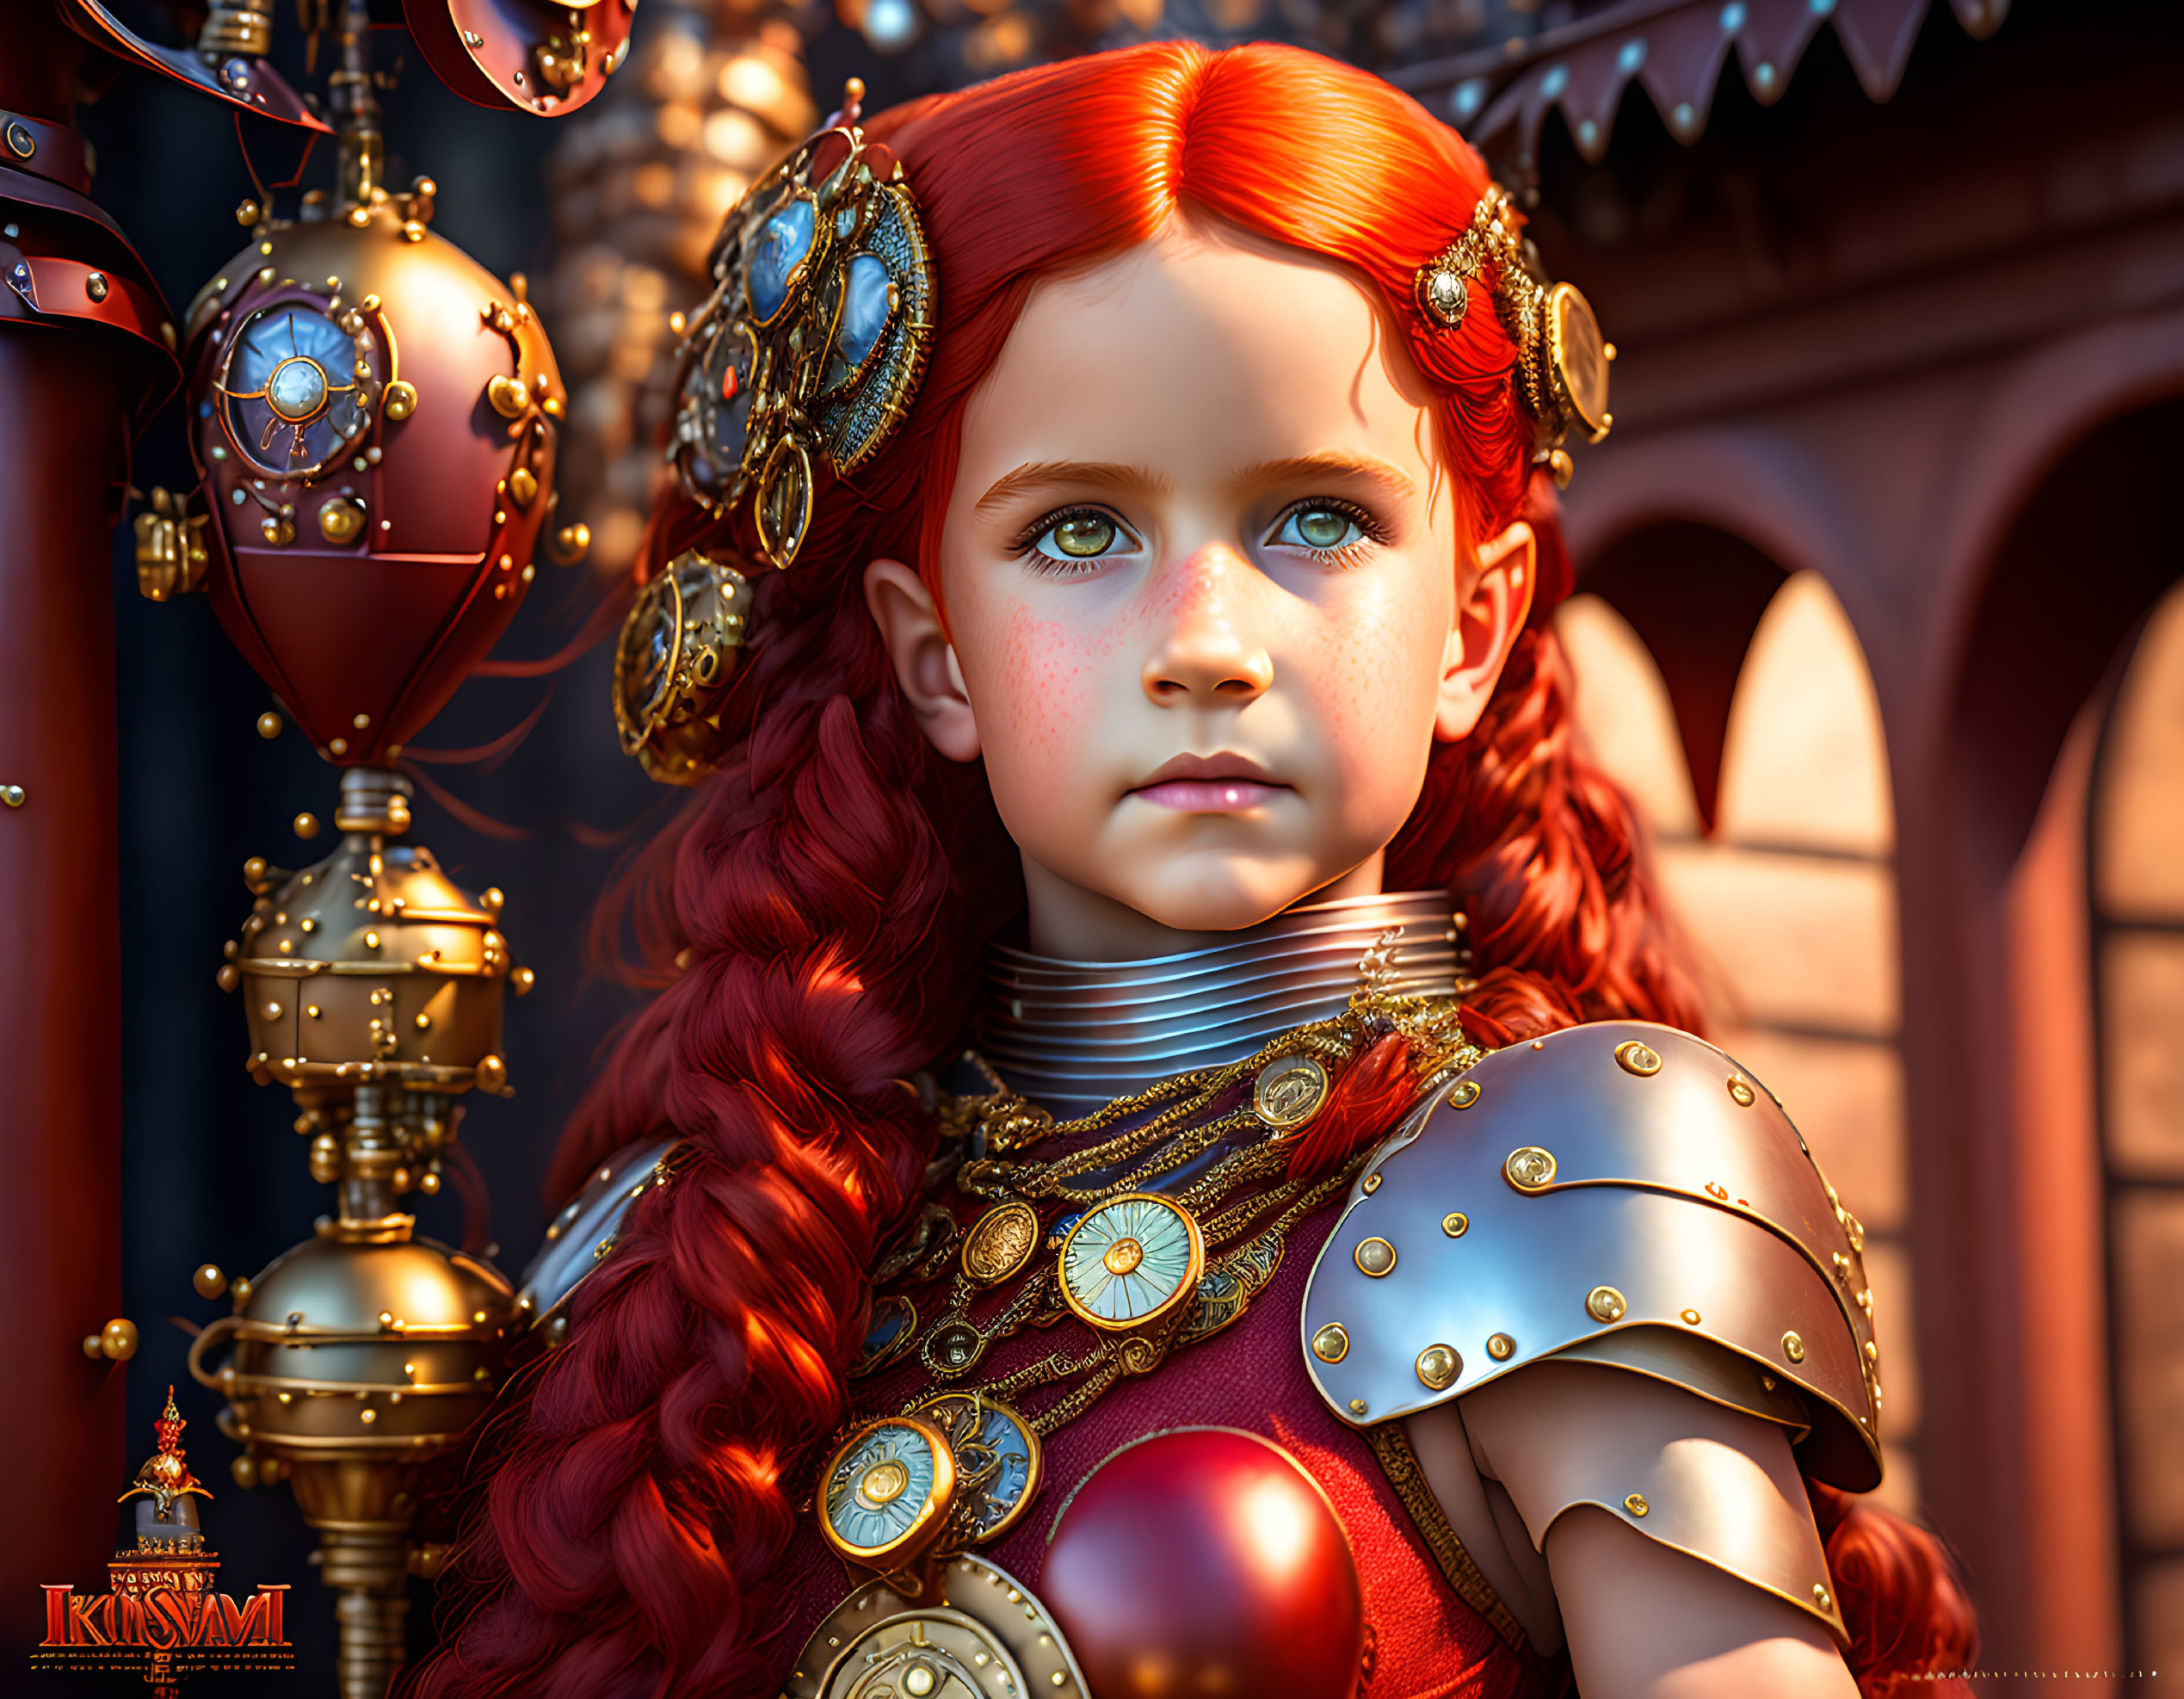 Vibrant red-haired girl in gold armor on warm vintage background